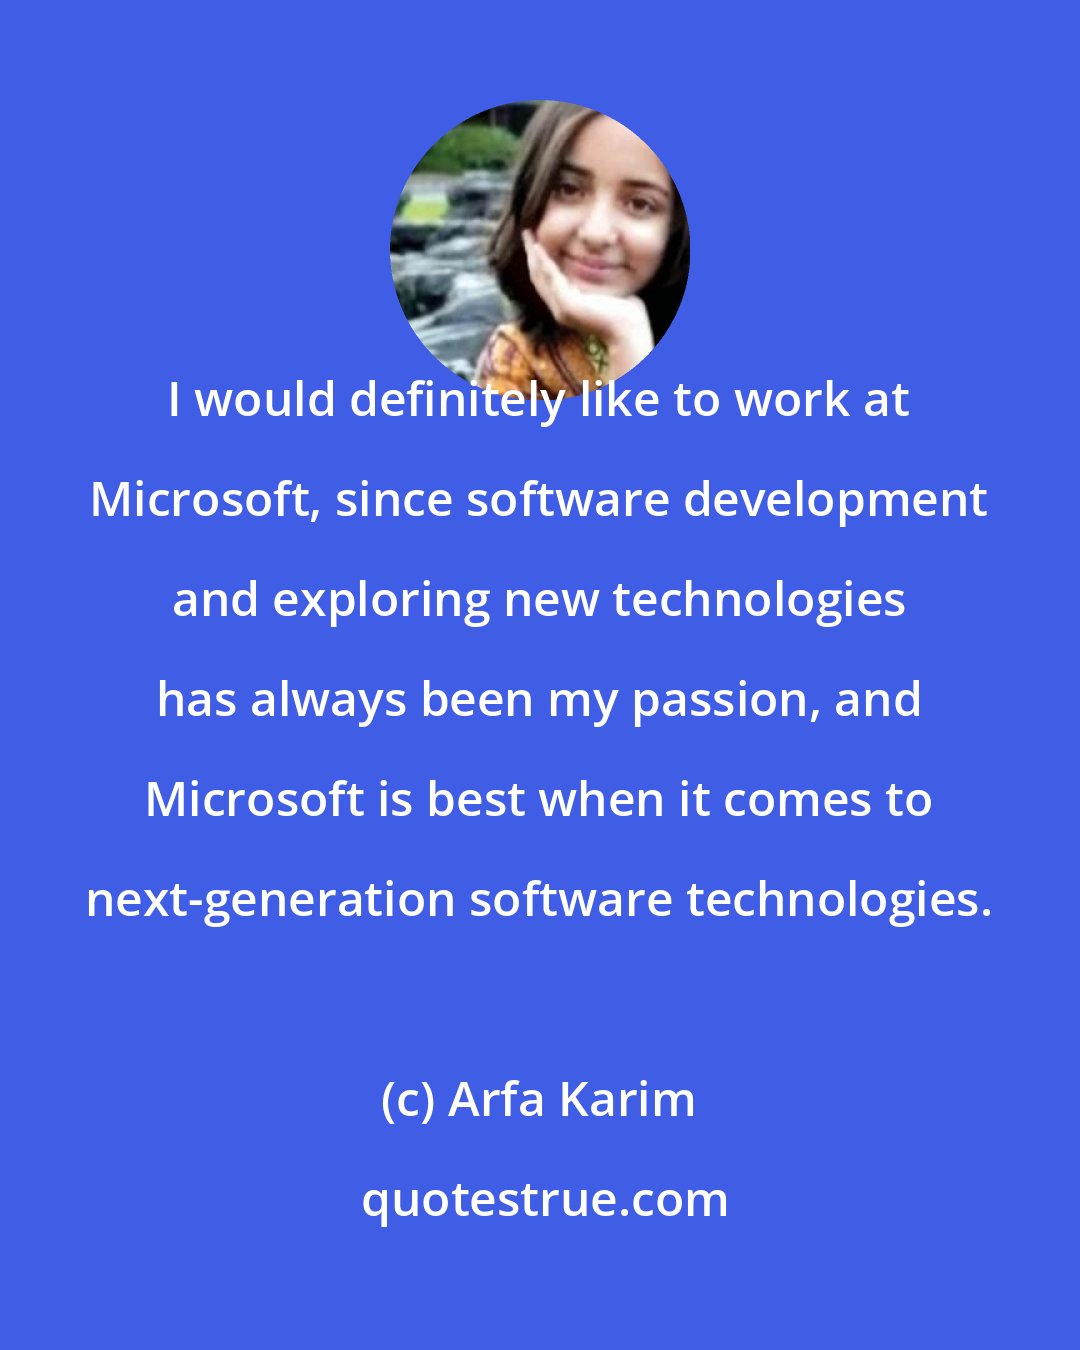 Arfa Karim: I would definitely like to work at Microsoft, since software development and exploring new technologies has always been my passion, and Microsoft is best when it comes to next-generation software technologies.